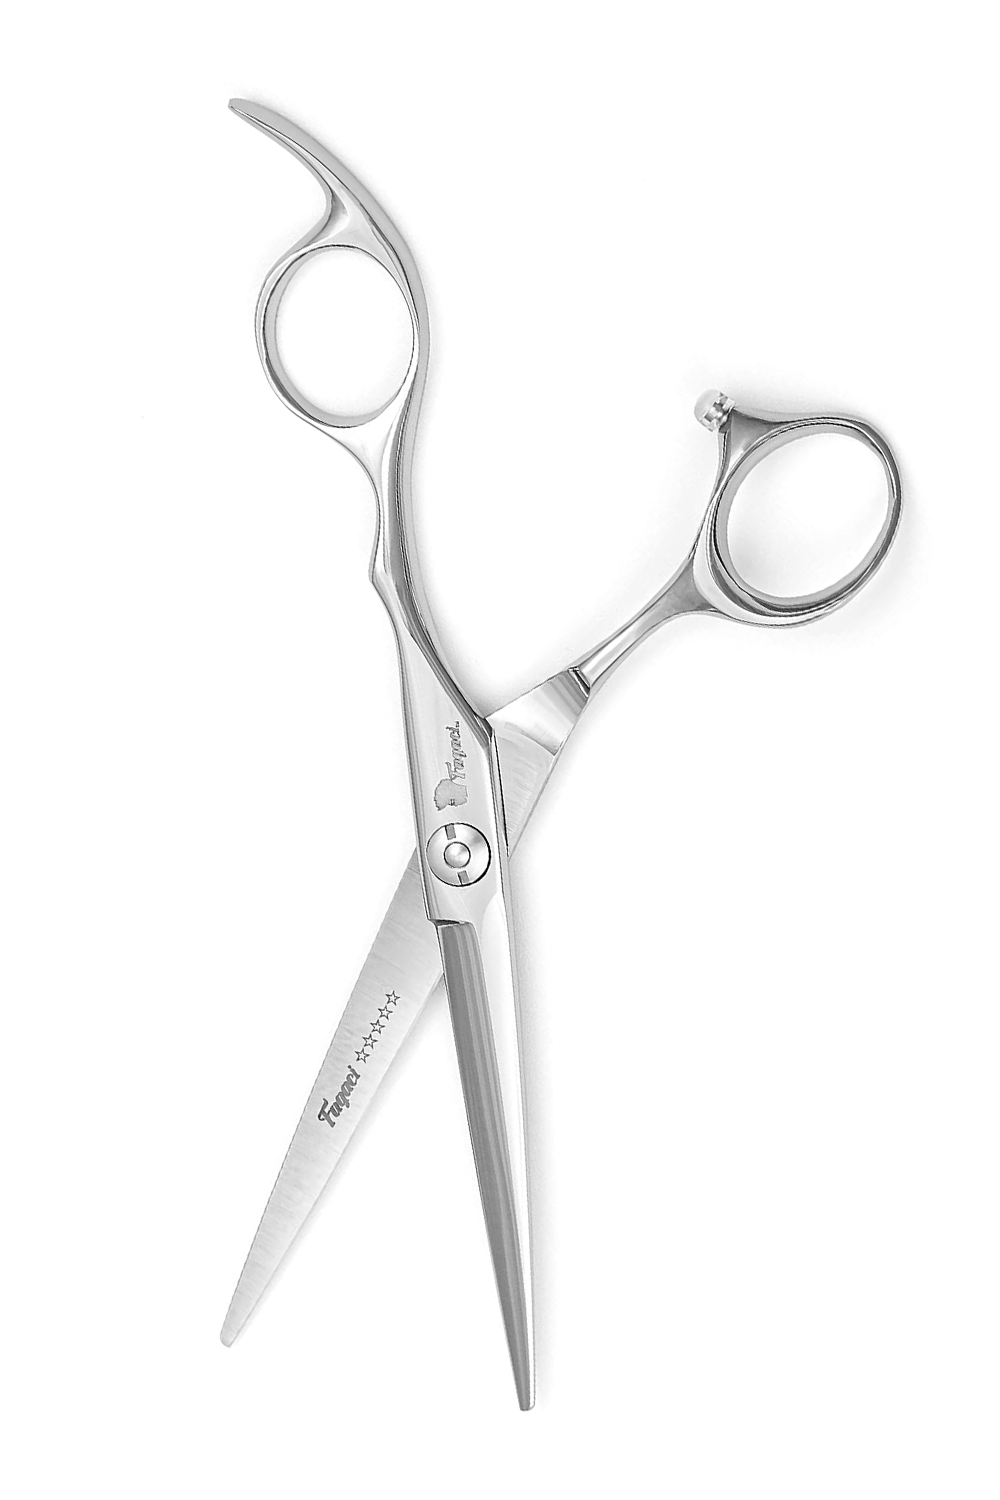 9 Best Hair Cutting Scissors of 2022 for At-Home Haircuts and Trims